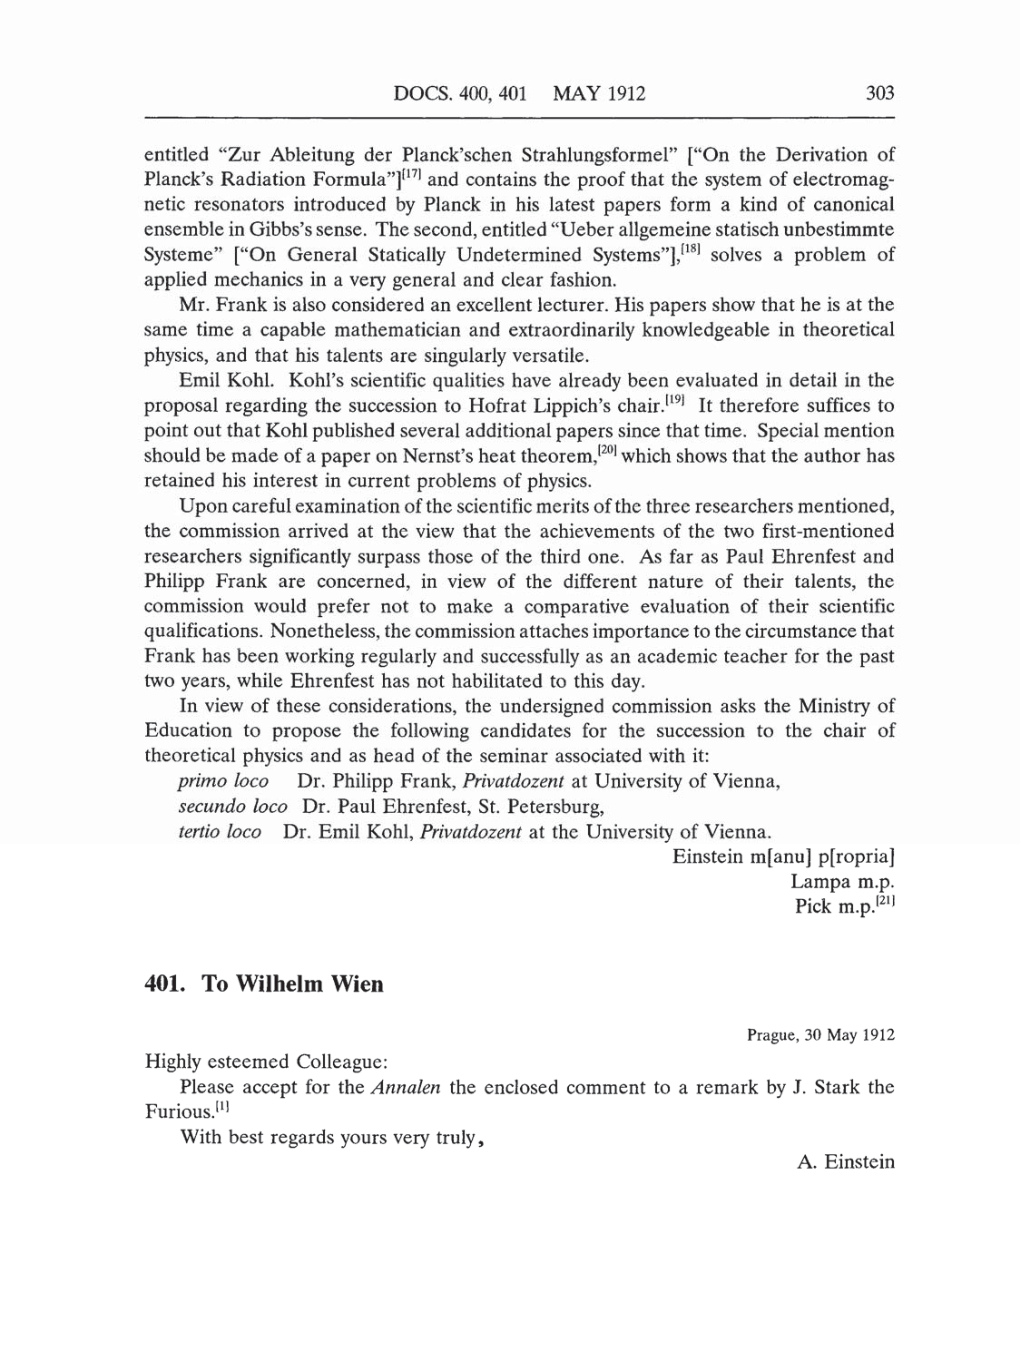 Volume 5: The Swiss Years: Correspondence, 1902-1914 (English translation supplement) page 303